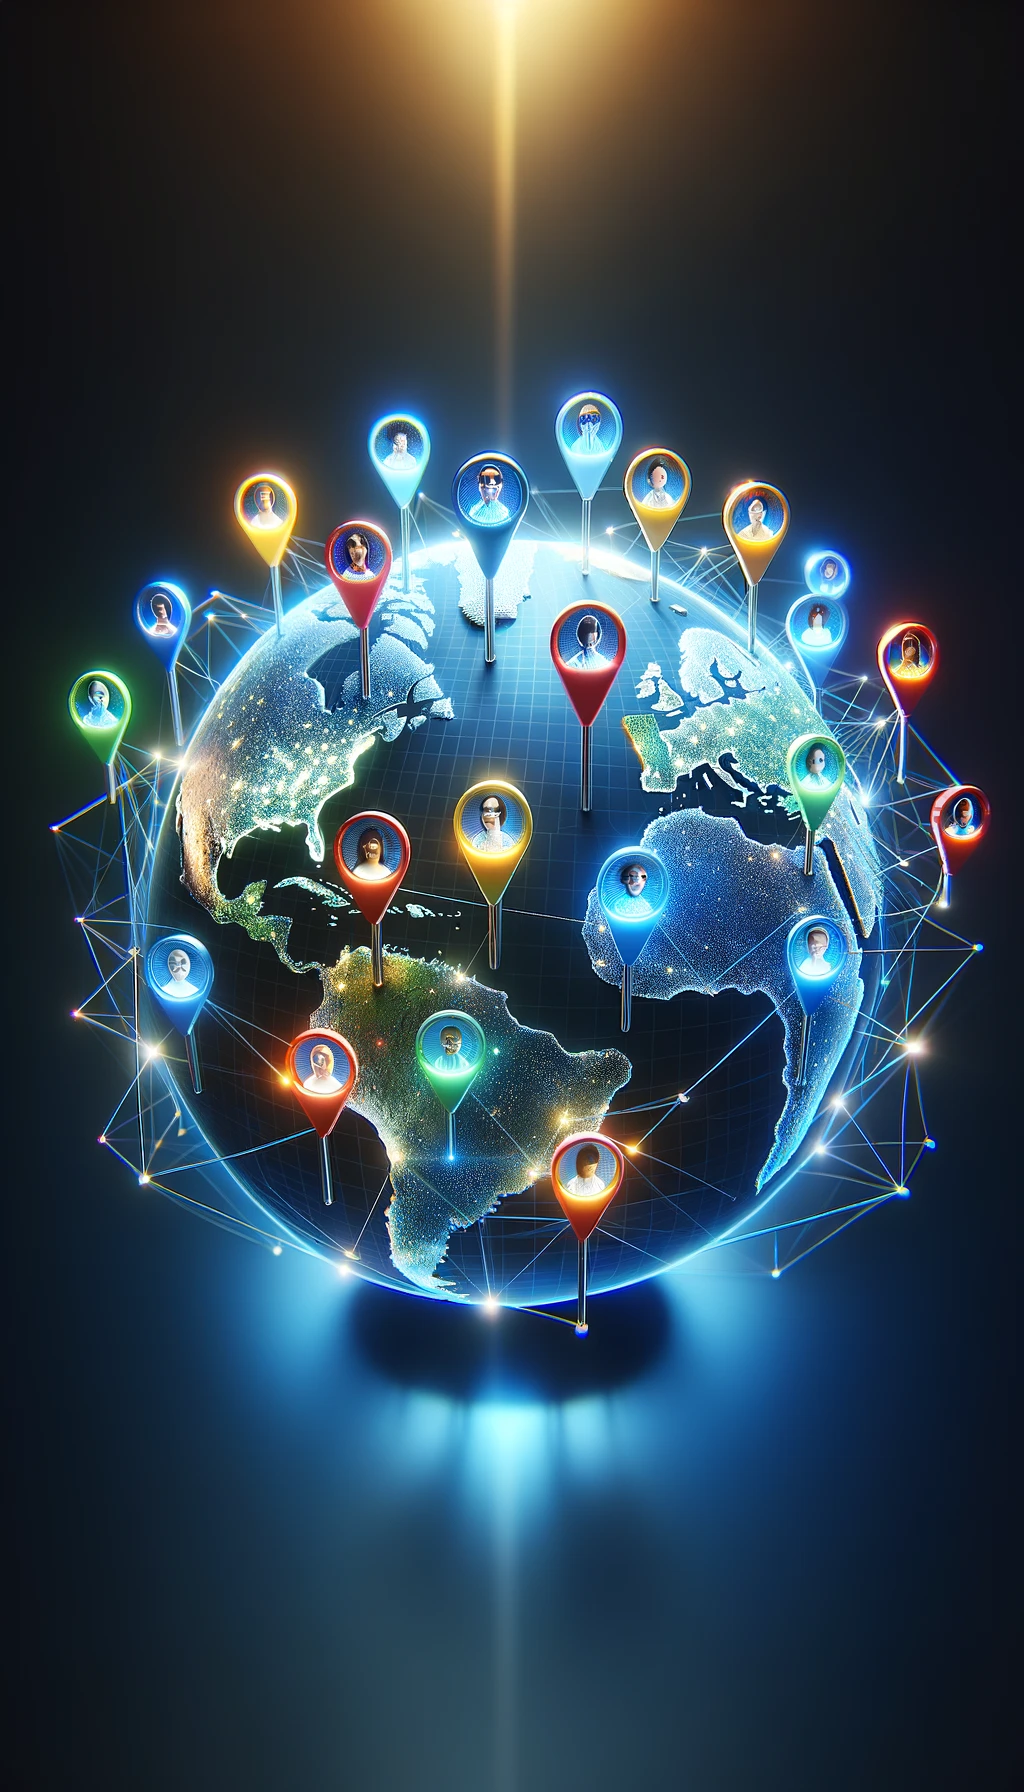  A 3D globe on a dark background with illuminated pins and avatars representing a diverse international team connected by digital lines.